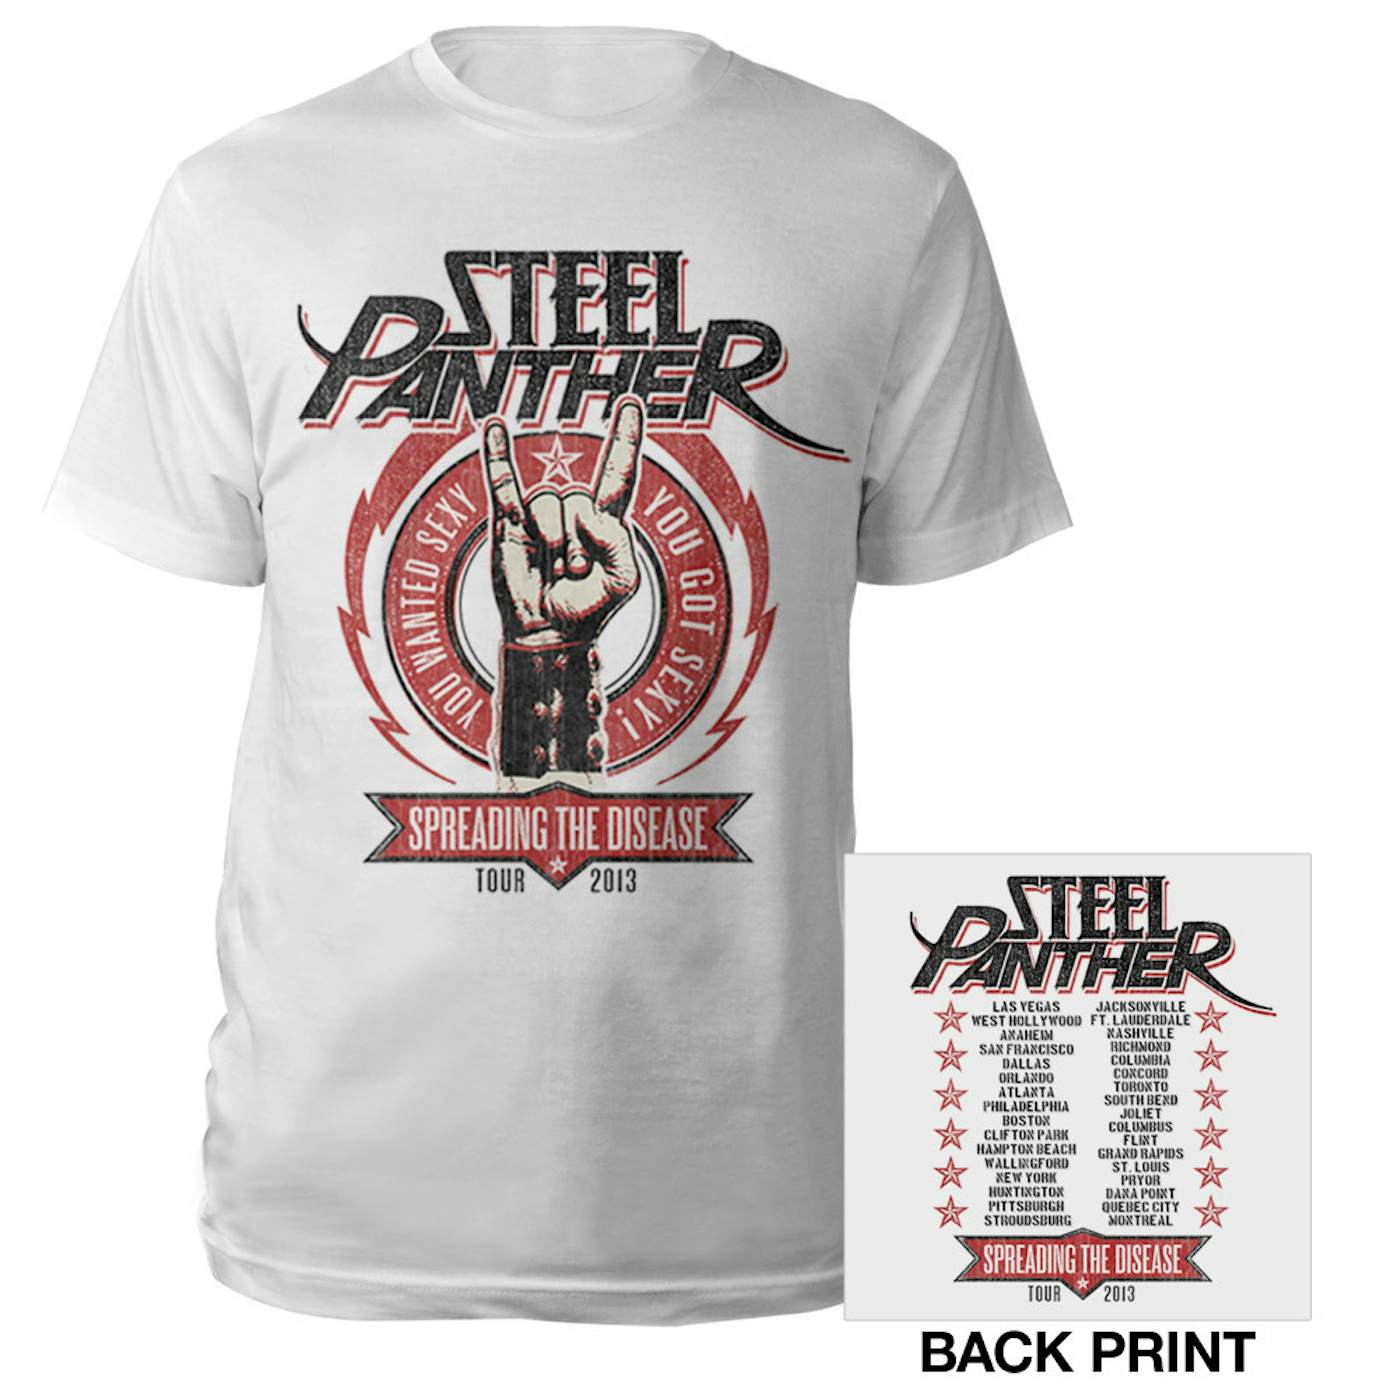 Steel Panther Spreading the Disease Tour 2013 Shirt